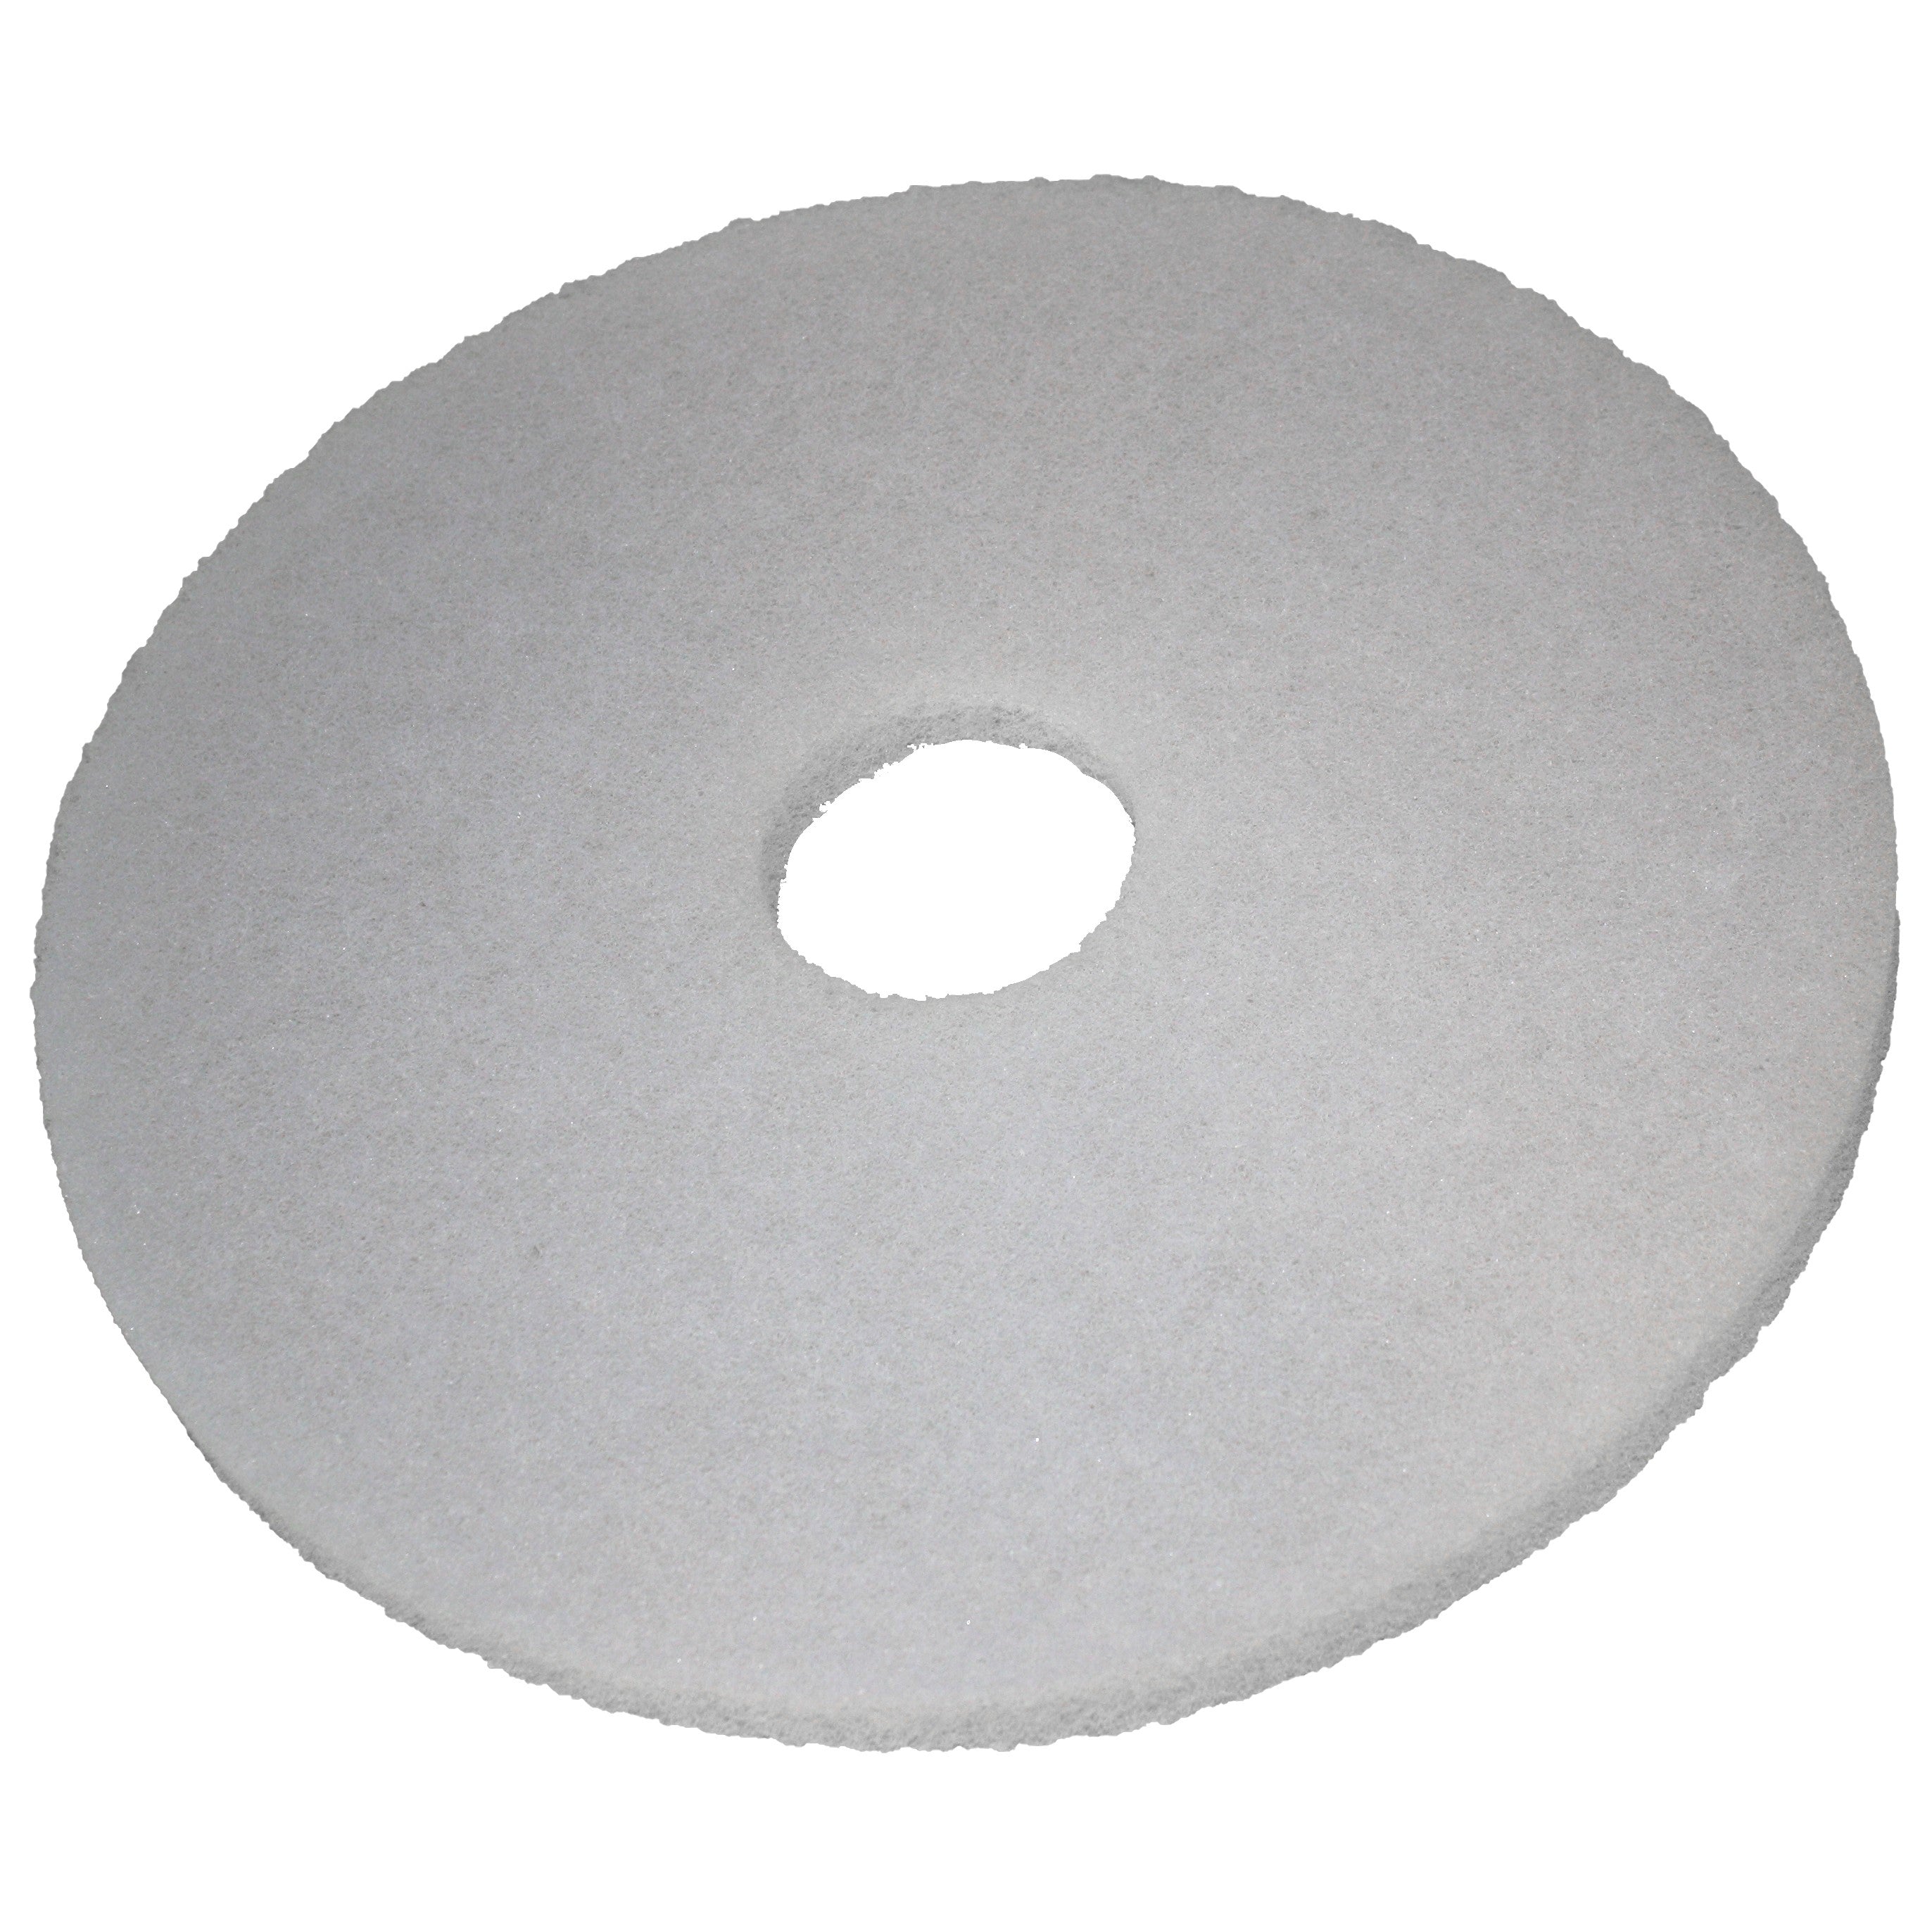 Pad weiss, Ø 355 mm, Polyester